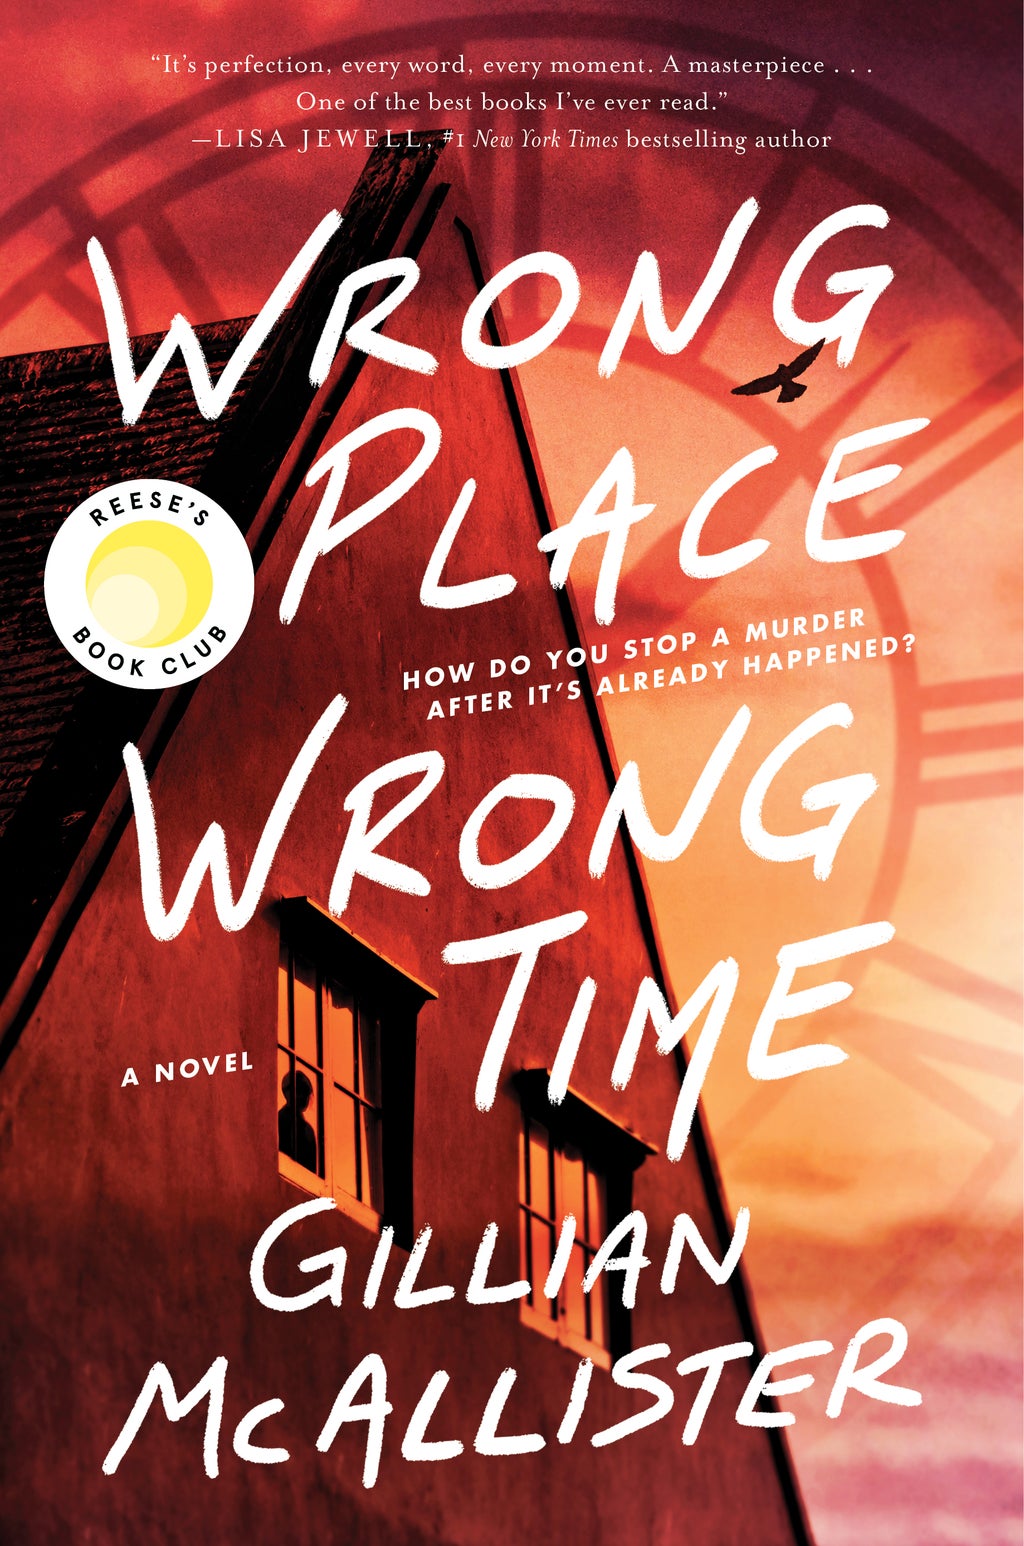 “Wrong Place Wrong Time” by Gillian McAllister